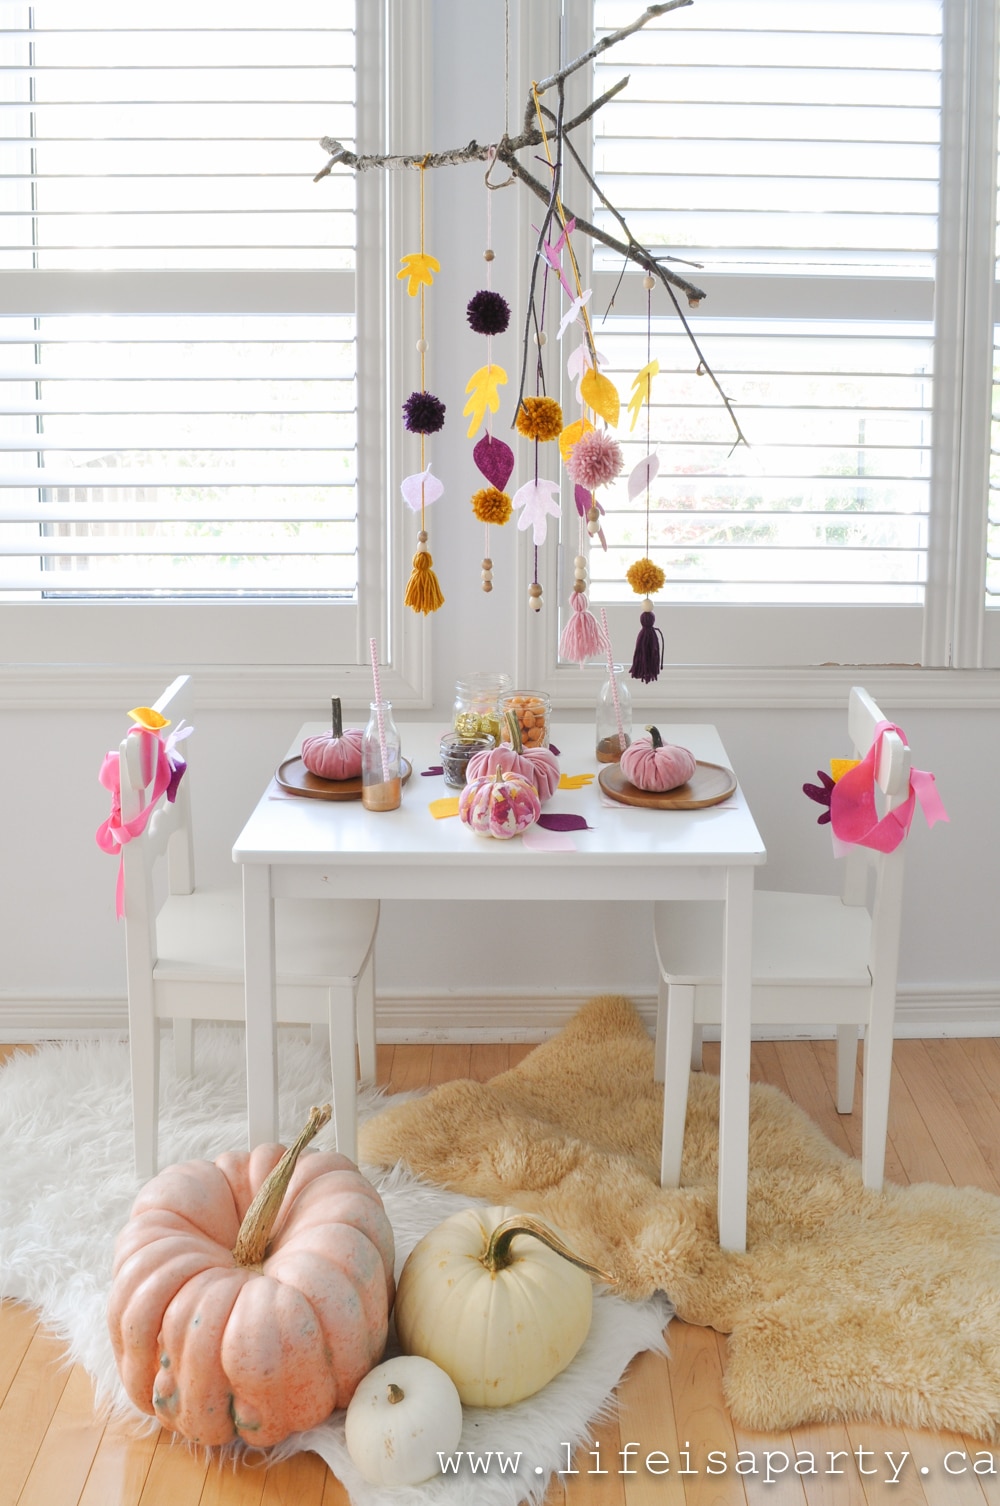 Kids Thanksgiving Table: a leaf mobile, painted pumpkins, velvet pumpkins, and leaf crowns create a special spot for special guests.